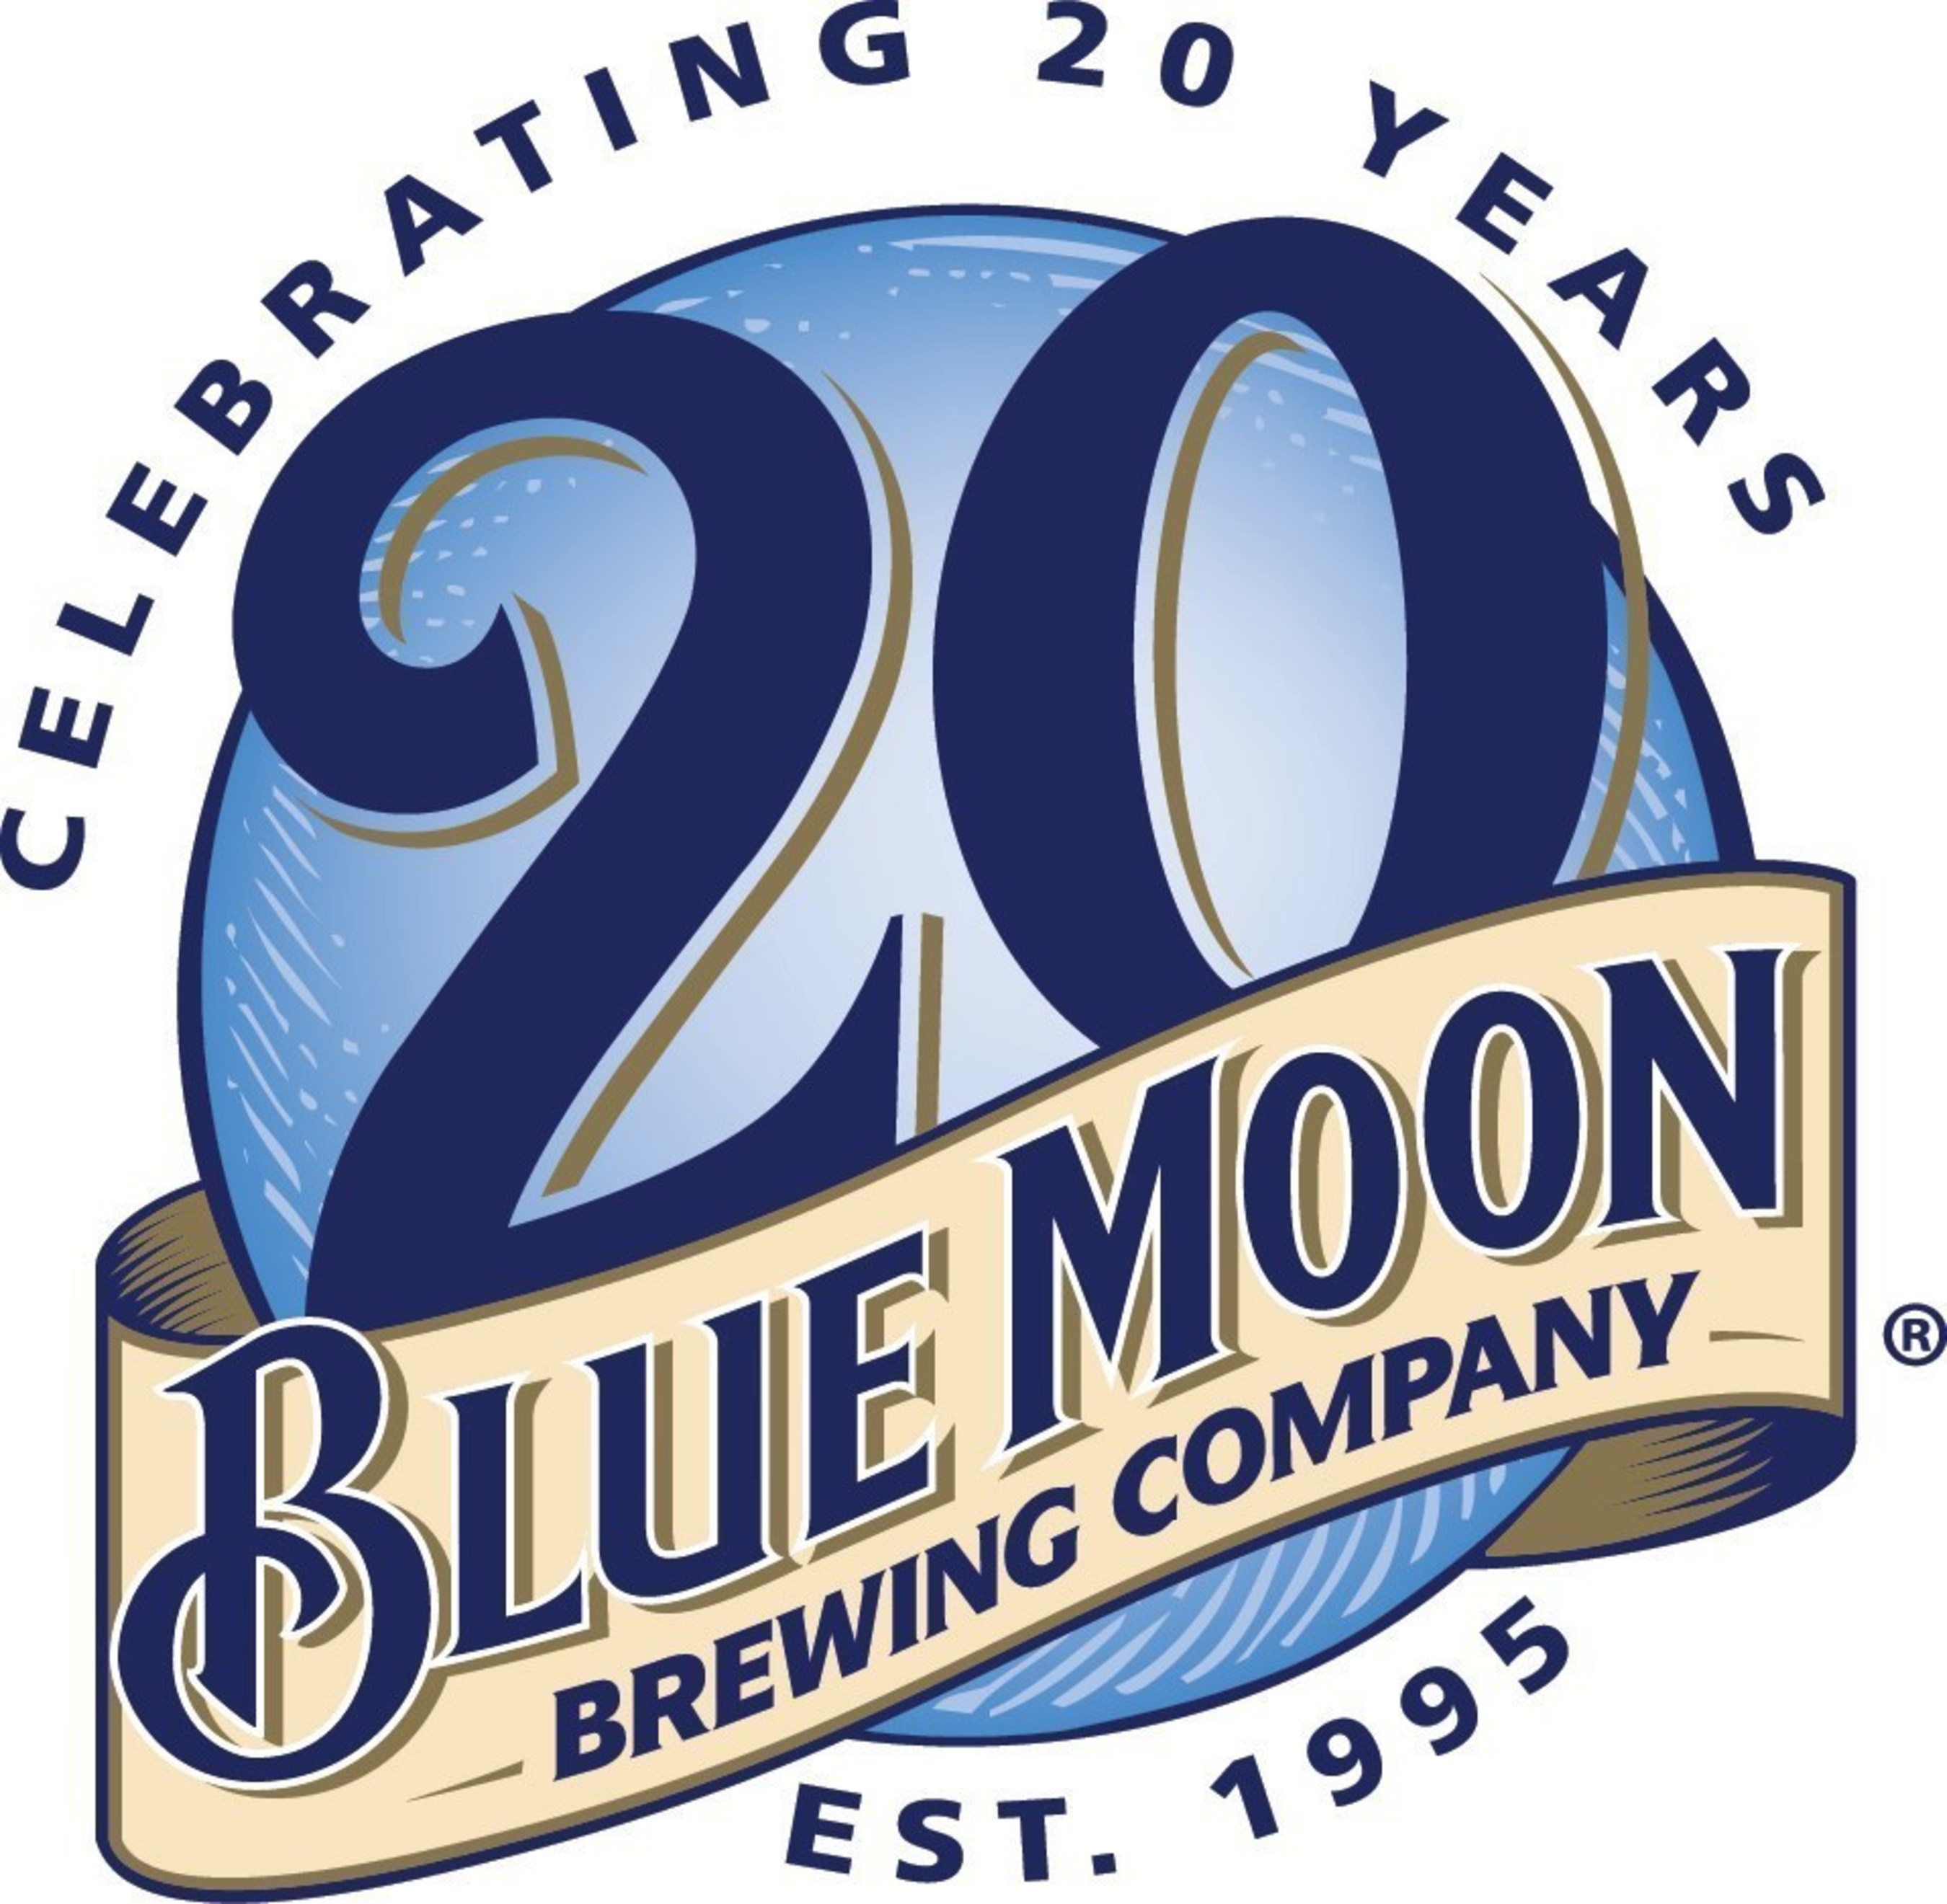 BLUE MOON BREWING COMPANY SPOTLIGHTS RISING ARTISTS THROUGH BOTTLE SERIES TRIBUTE